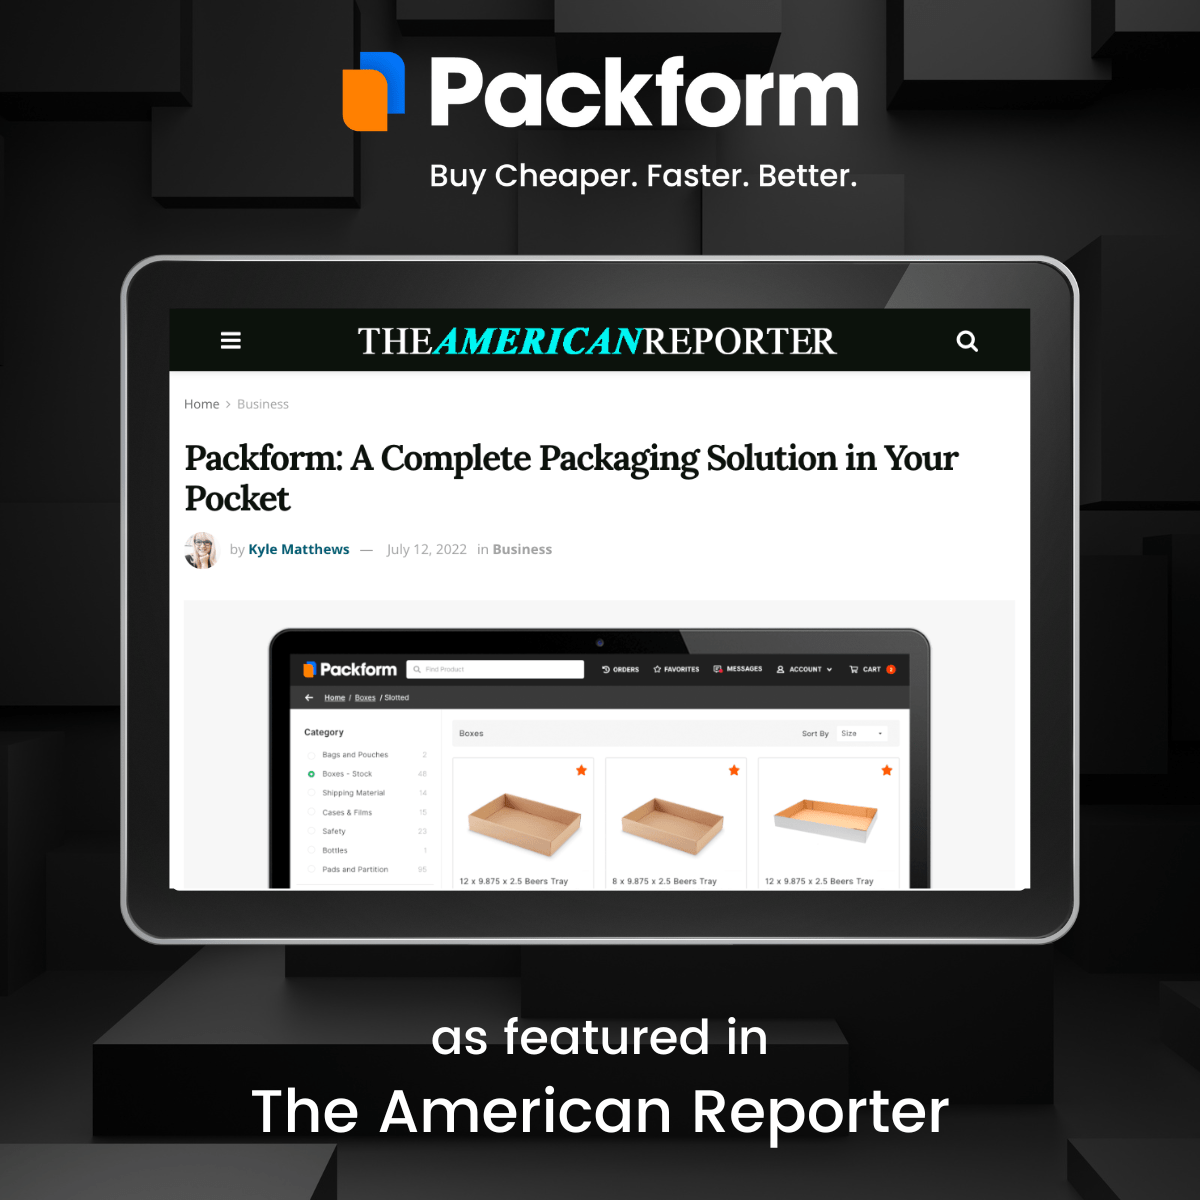 Packform: A Complete Packaging Solution in Your Pocket